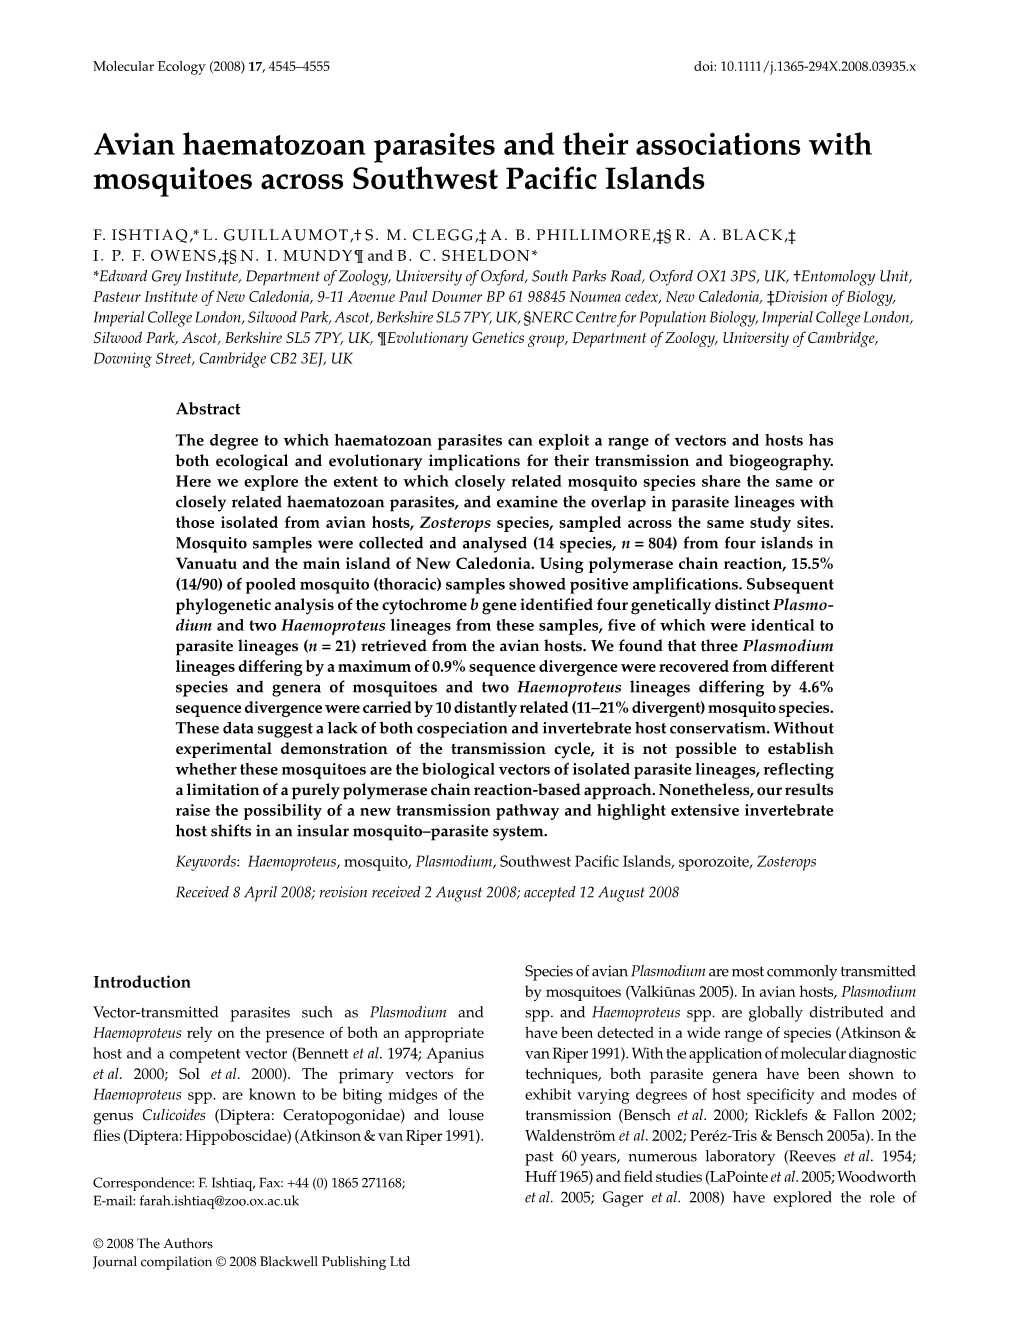 Avian Haematozoan Parasites and Their Associations with Mosquitoes 4547